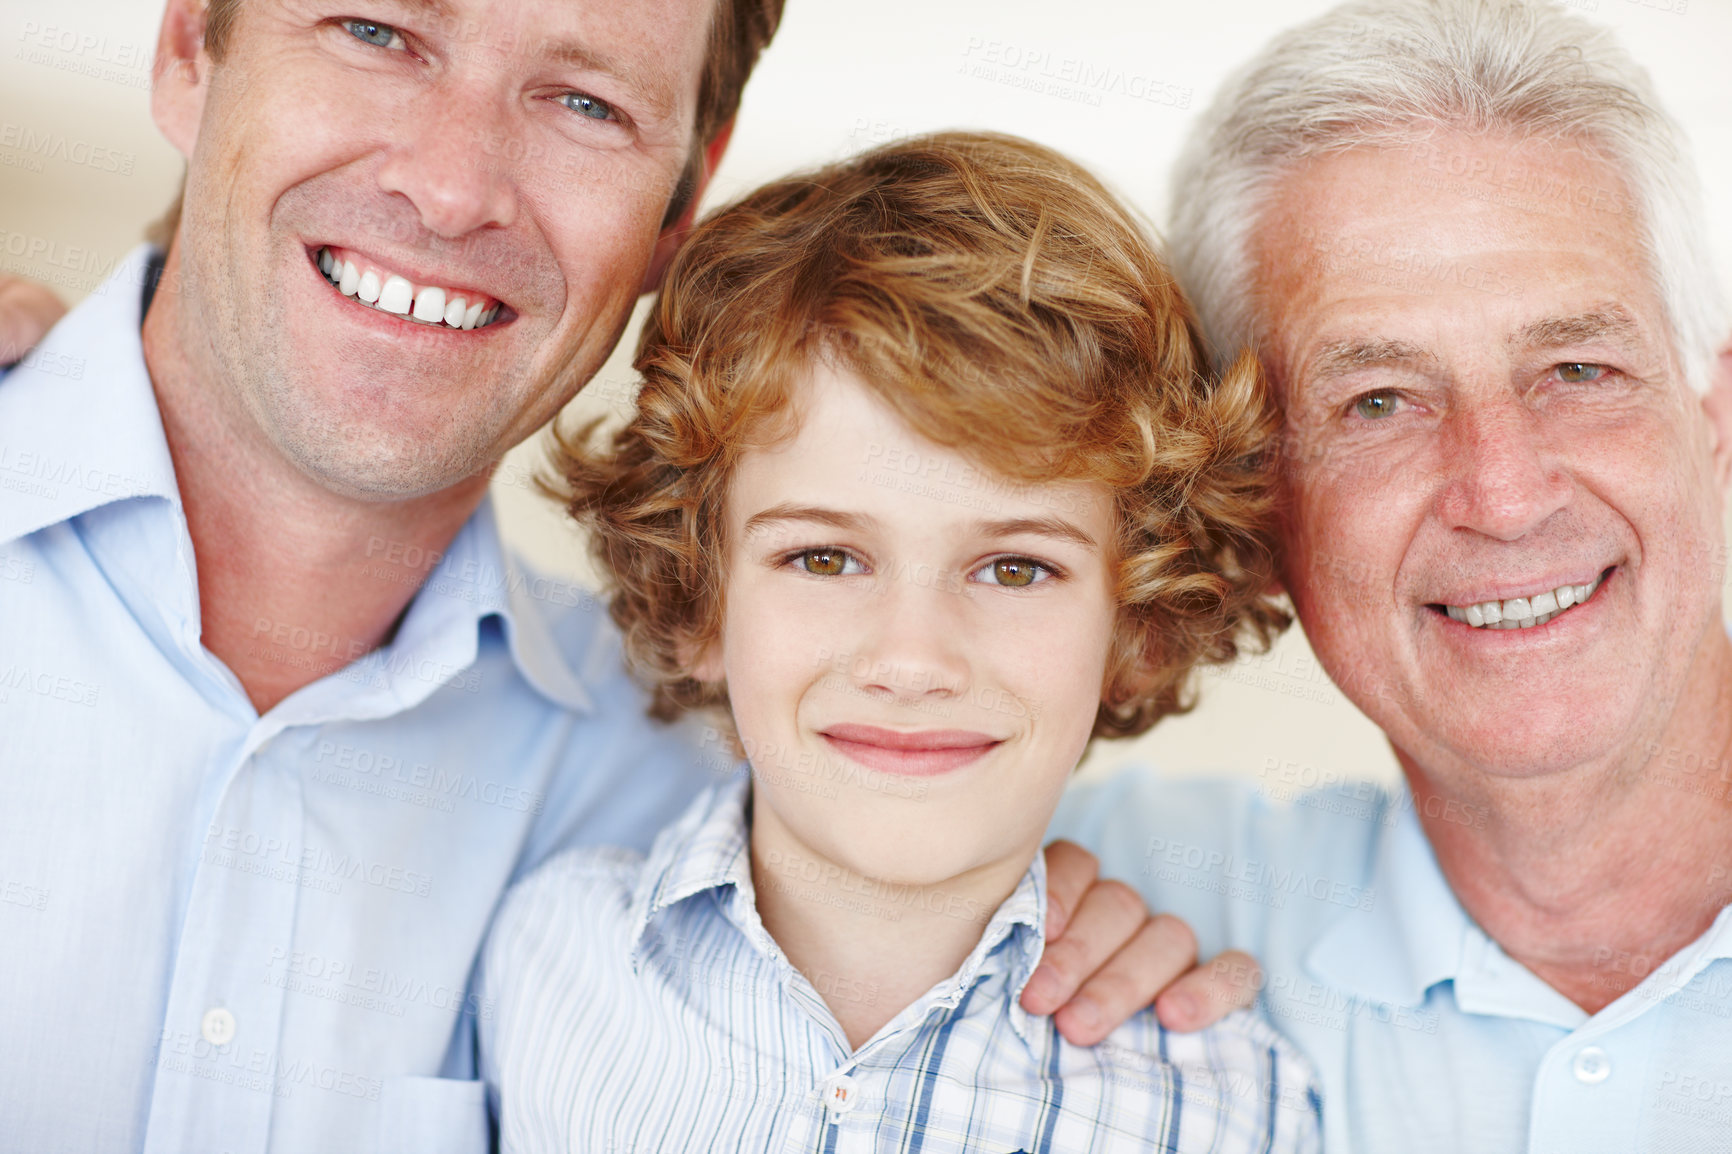 Buy stock photo Cropped portrait of a young boy standing with his father and grandfather